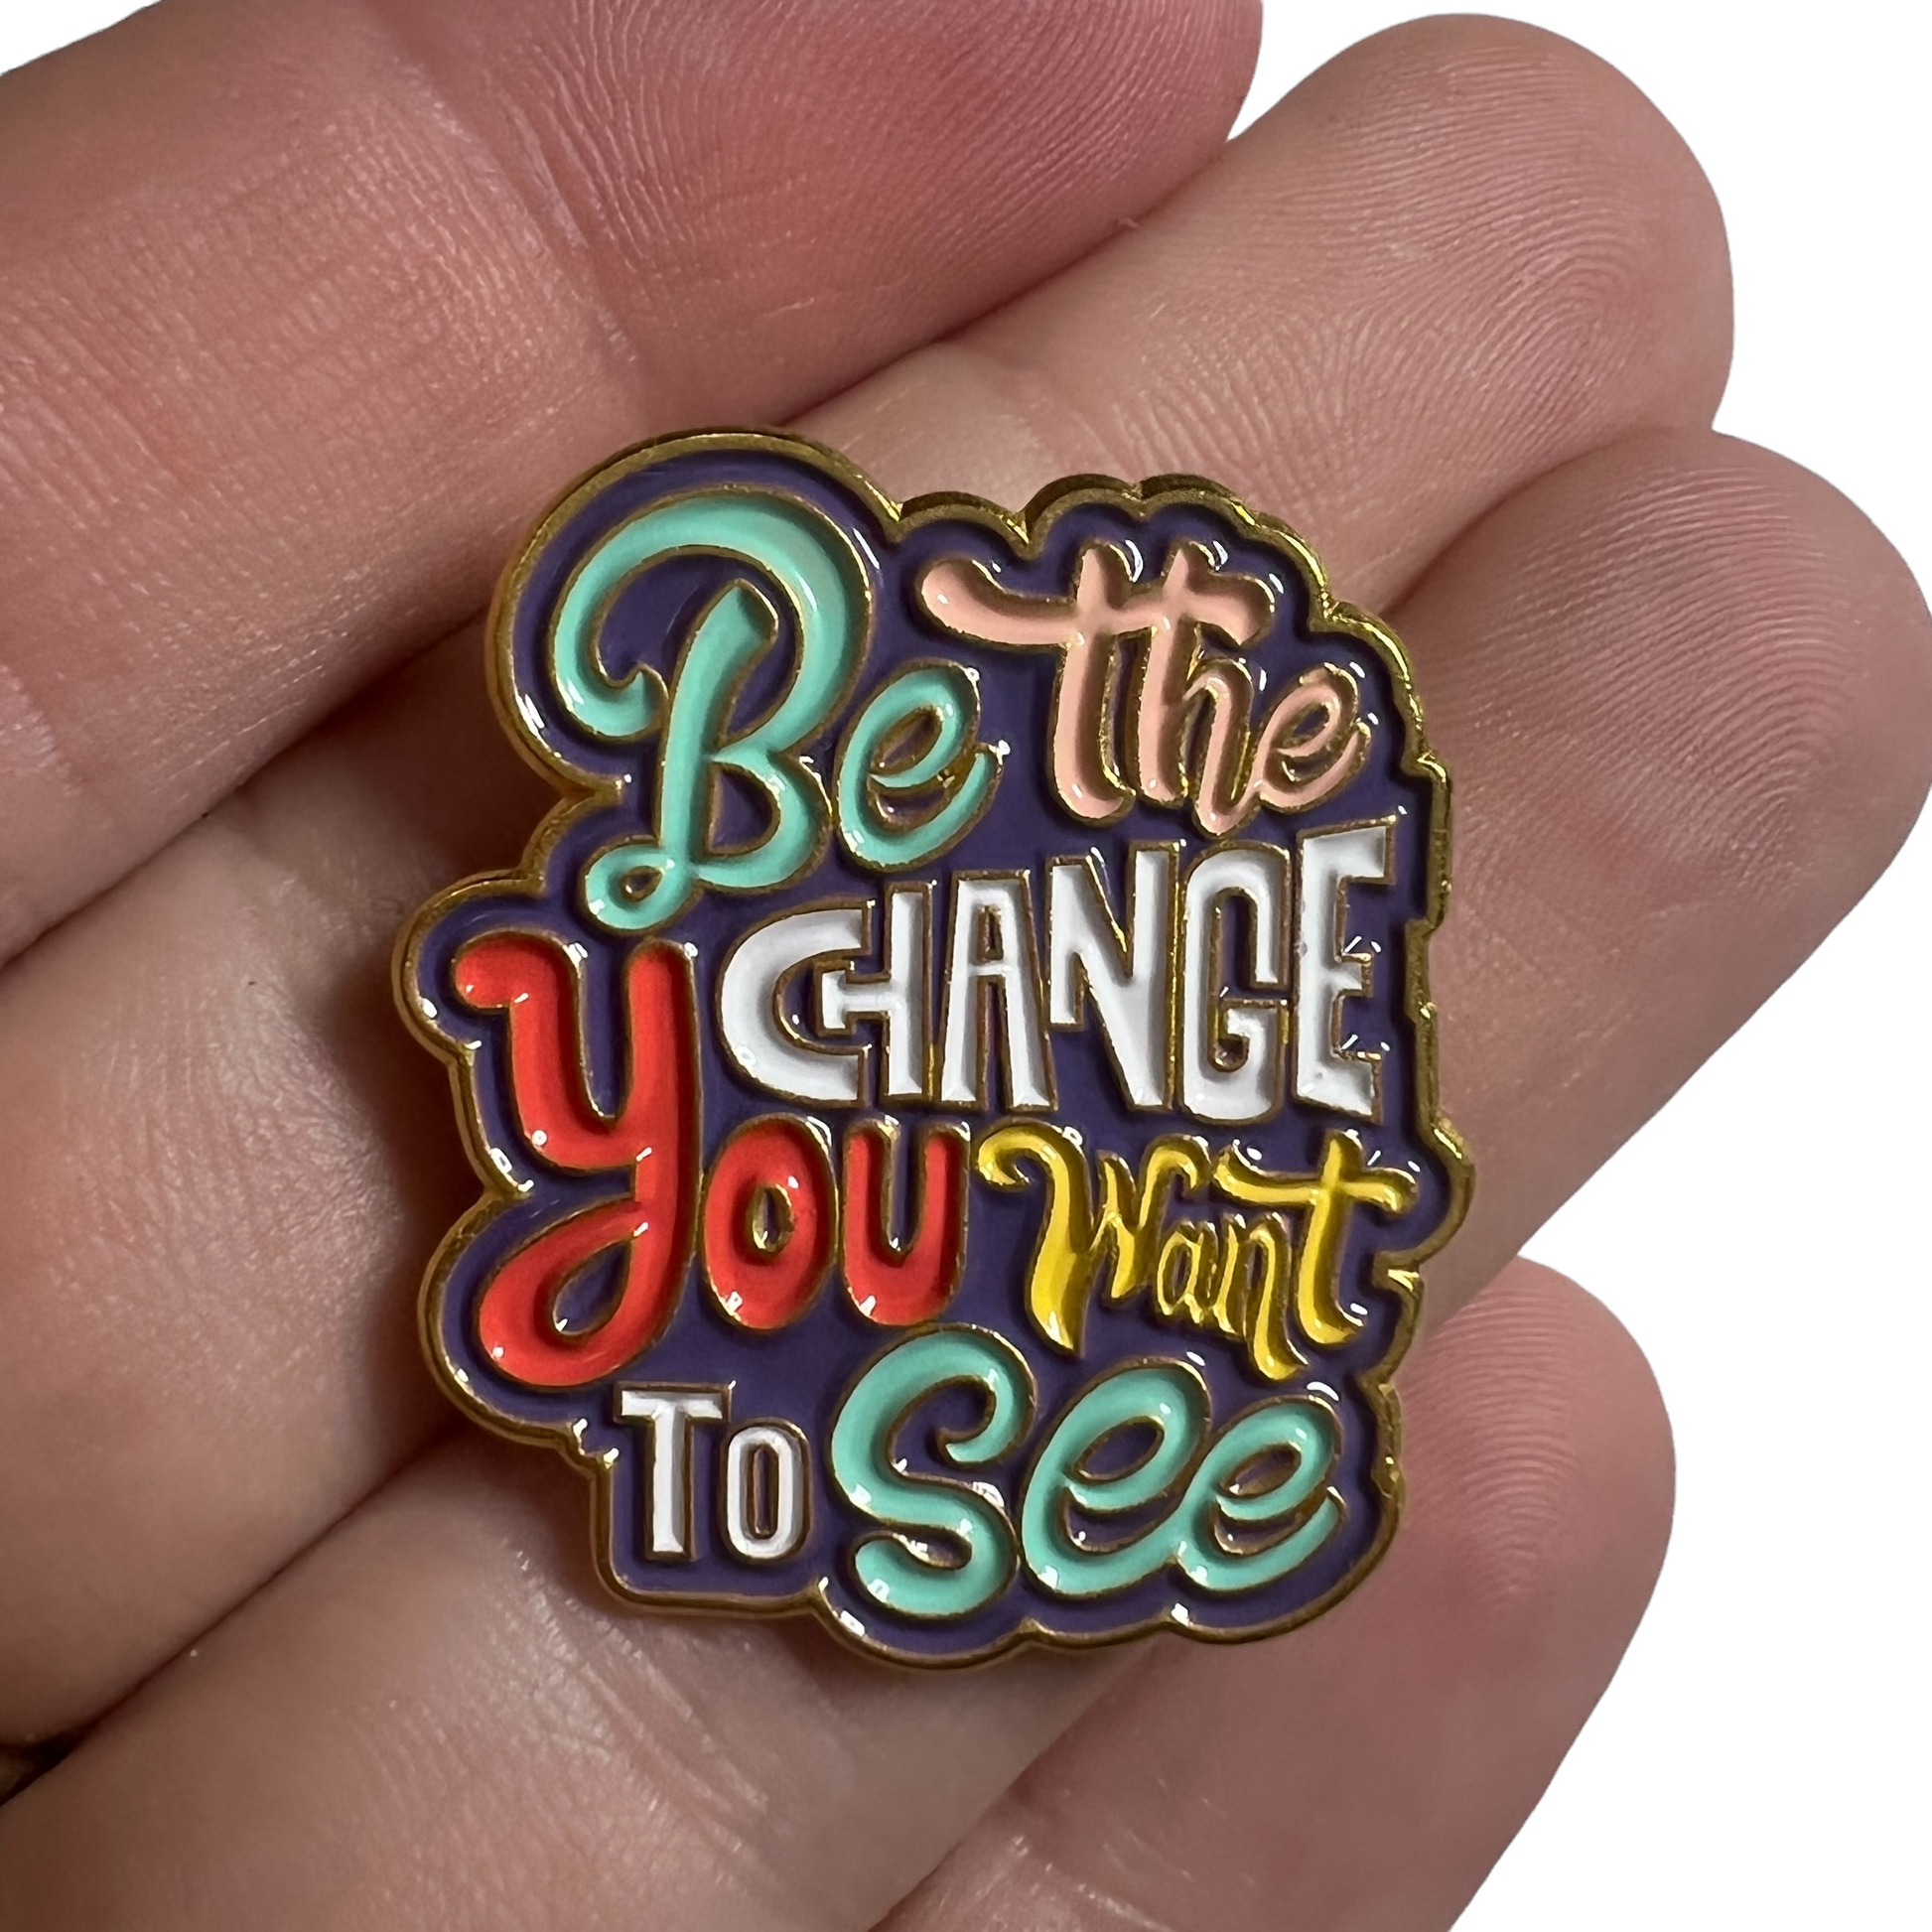 Pin — 'Be The Change You Want To See'  SPIRIT SPARKPLUGS Be The Change You Want To See  